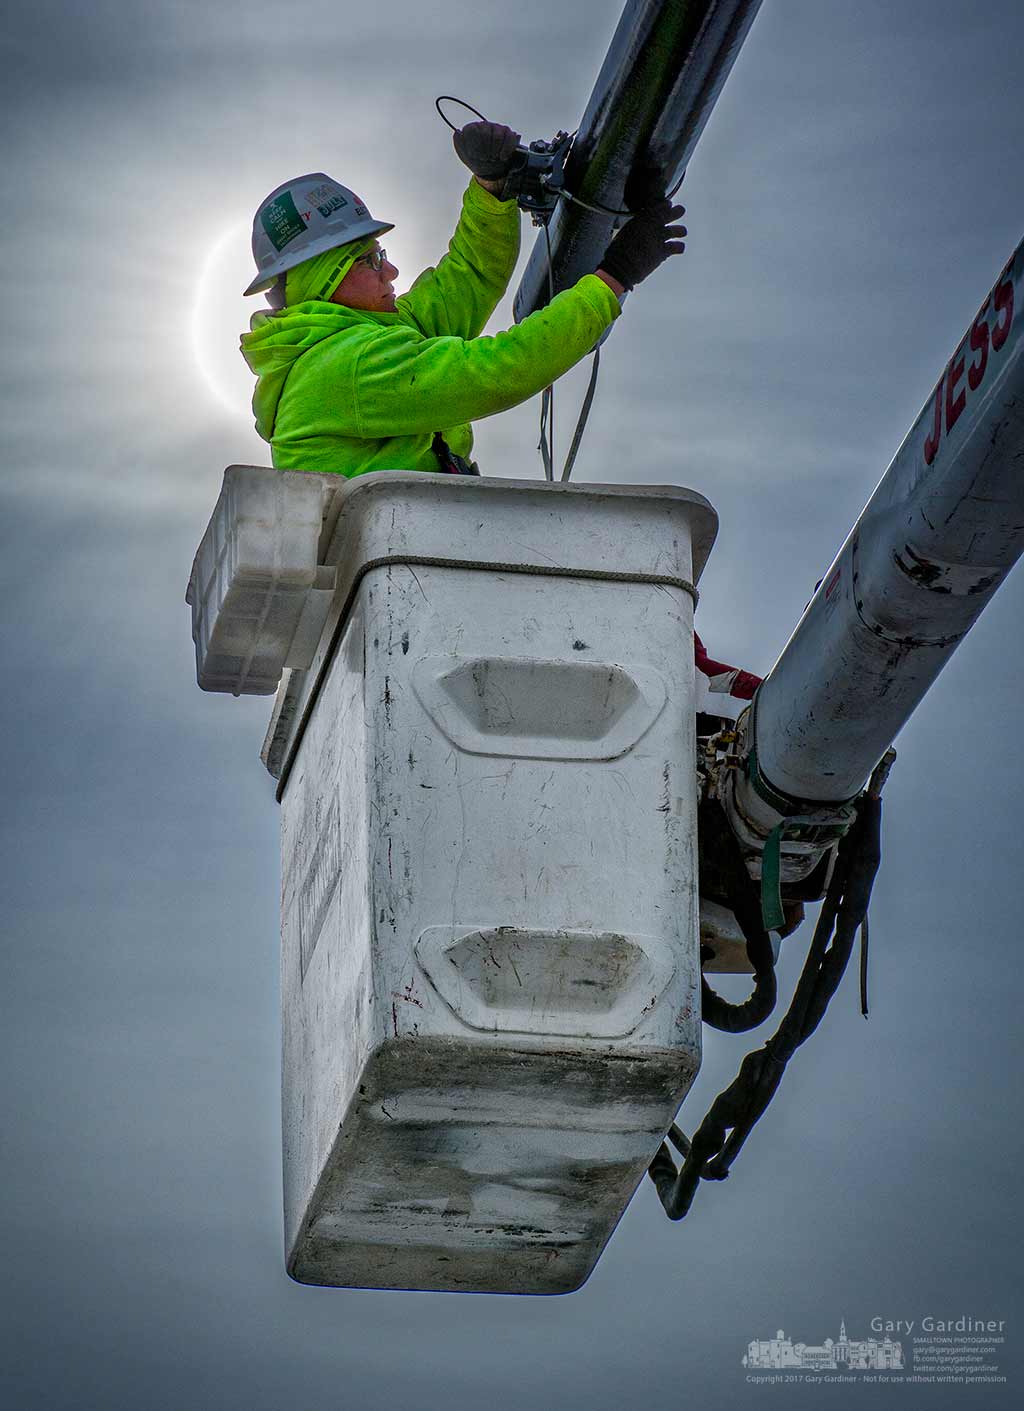 An electrician pulls cable through an arm of the new traffic signals supports at Otterbein and Schrock Road as construction resumes after the new year. My Final Photo for Jan. 9, 2017.